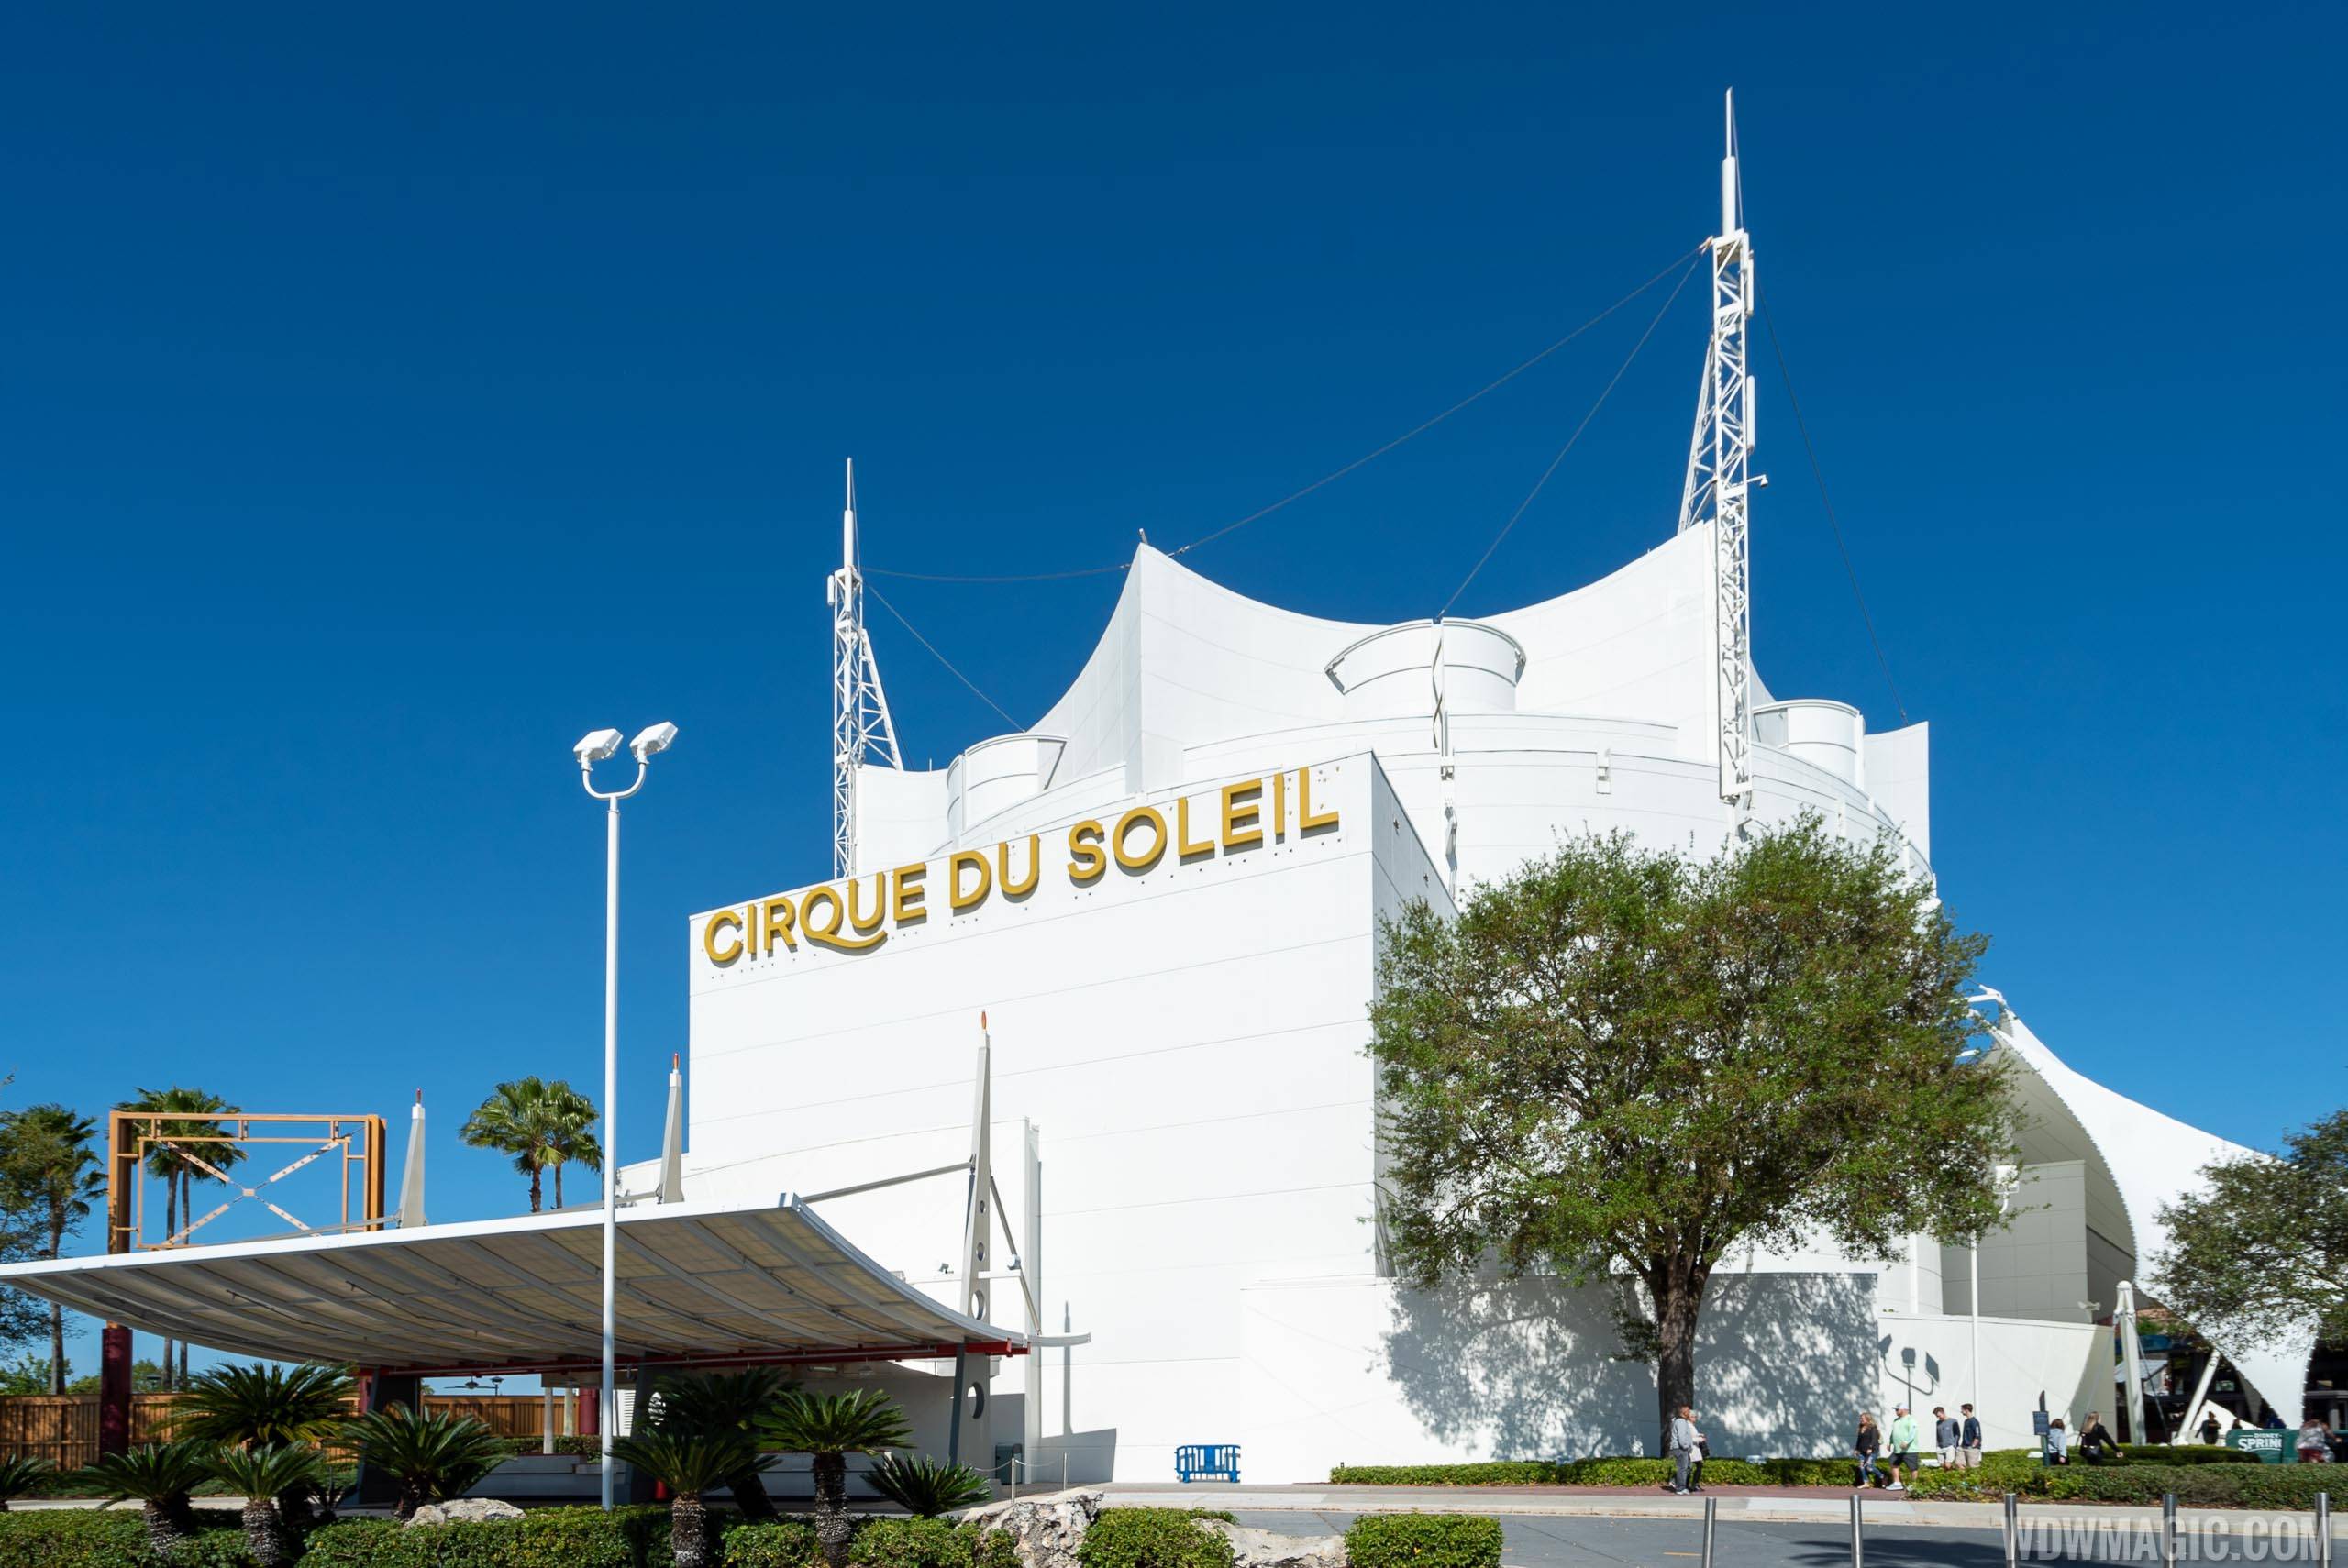 PHOTOS - New signs up on the Cirque du Soleil building at Disney Springs